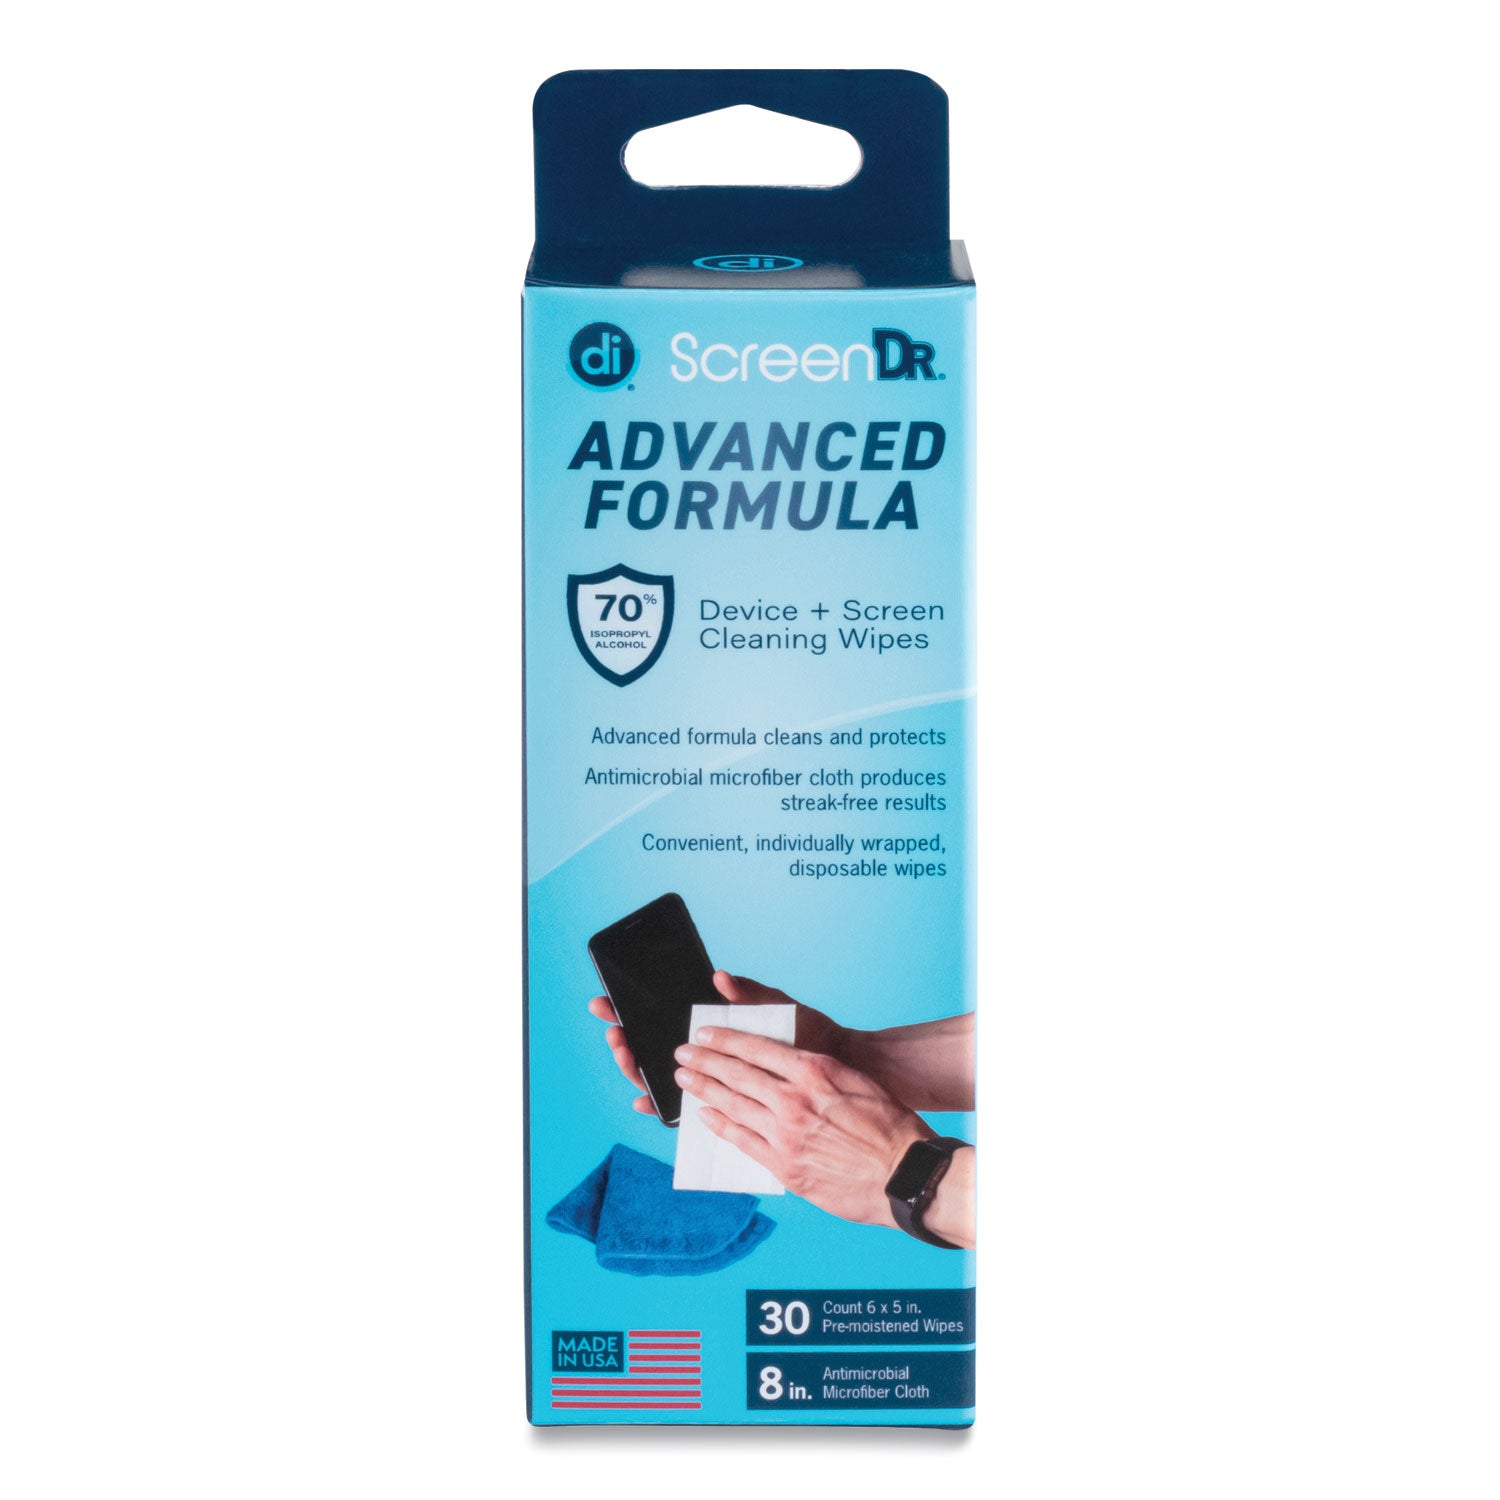 screendr-device-and-screen-cleaning-wipes-includes-30-individually-wrapped-wipes-and-8-microfiber-cloth-6-x-5-white_dgv32346 - 1